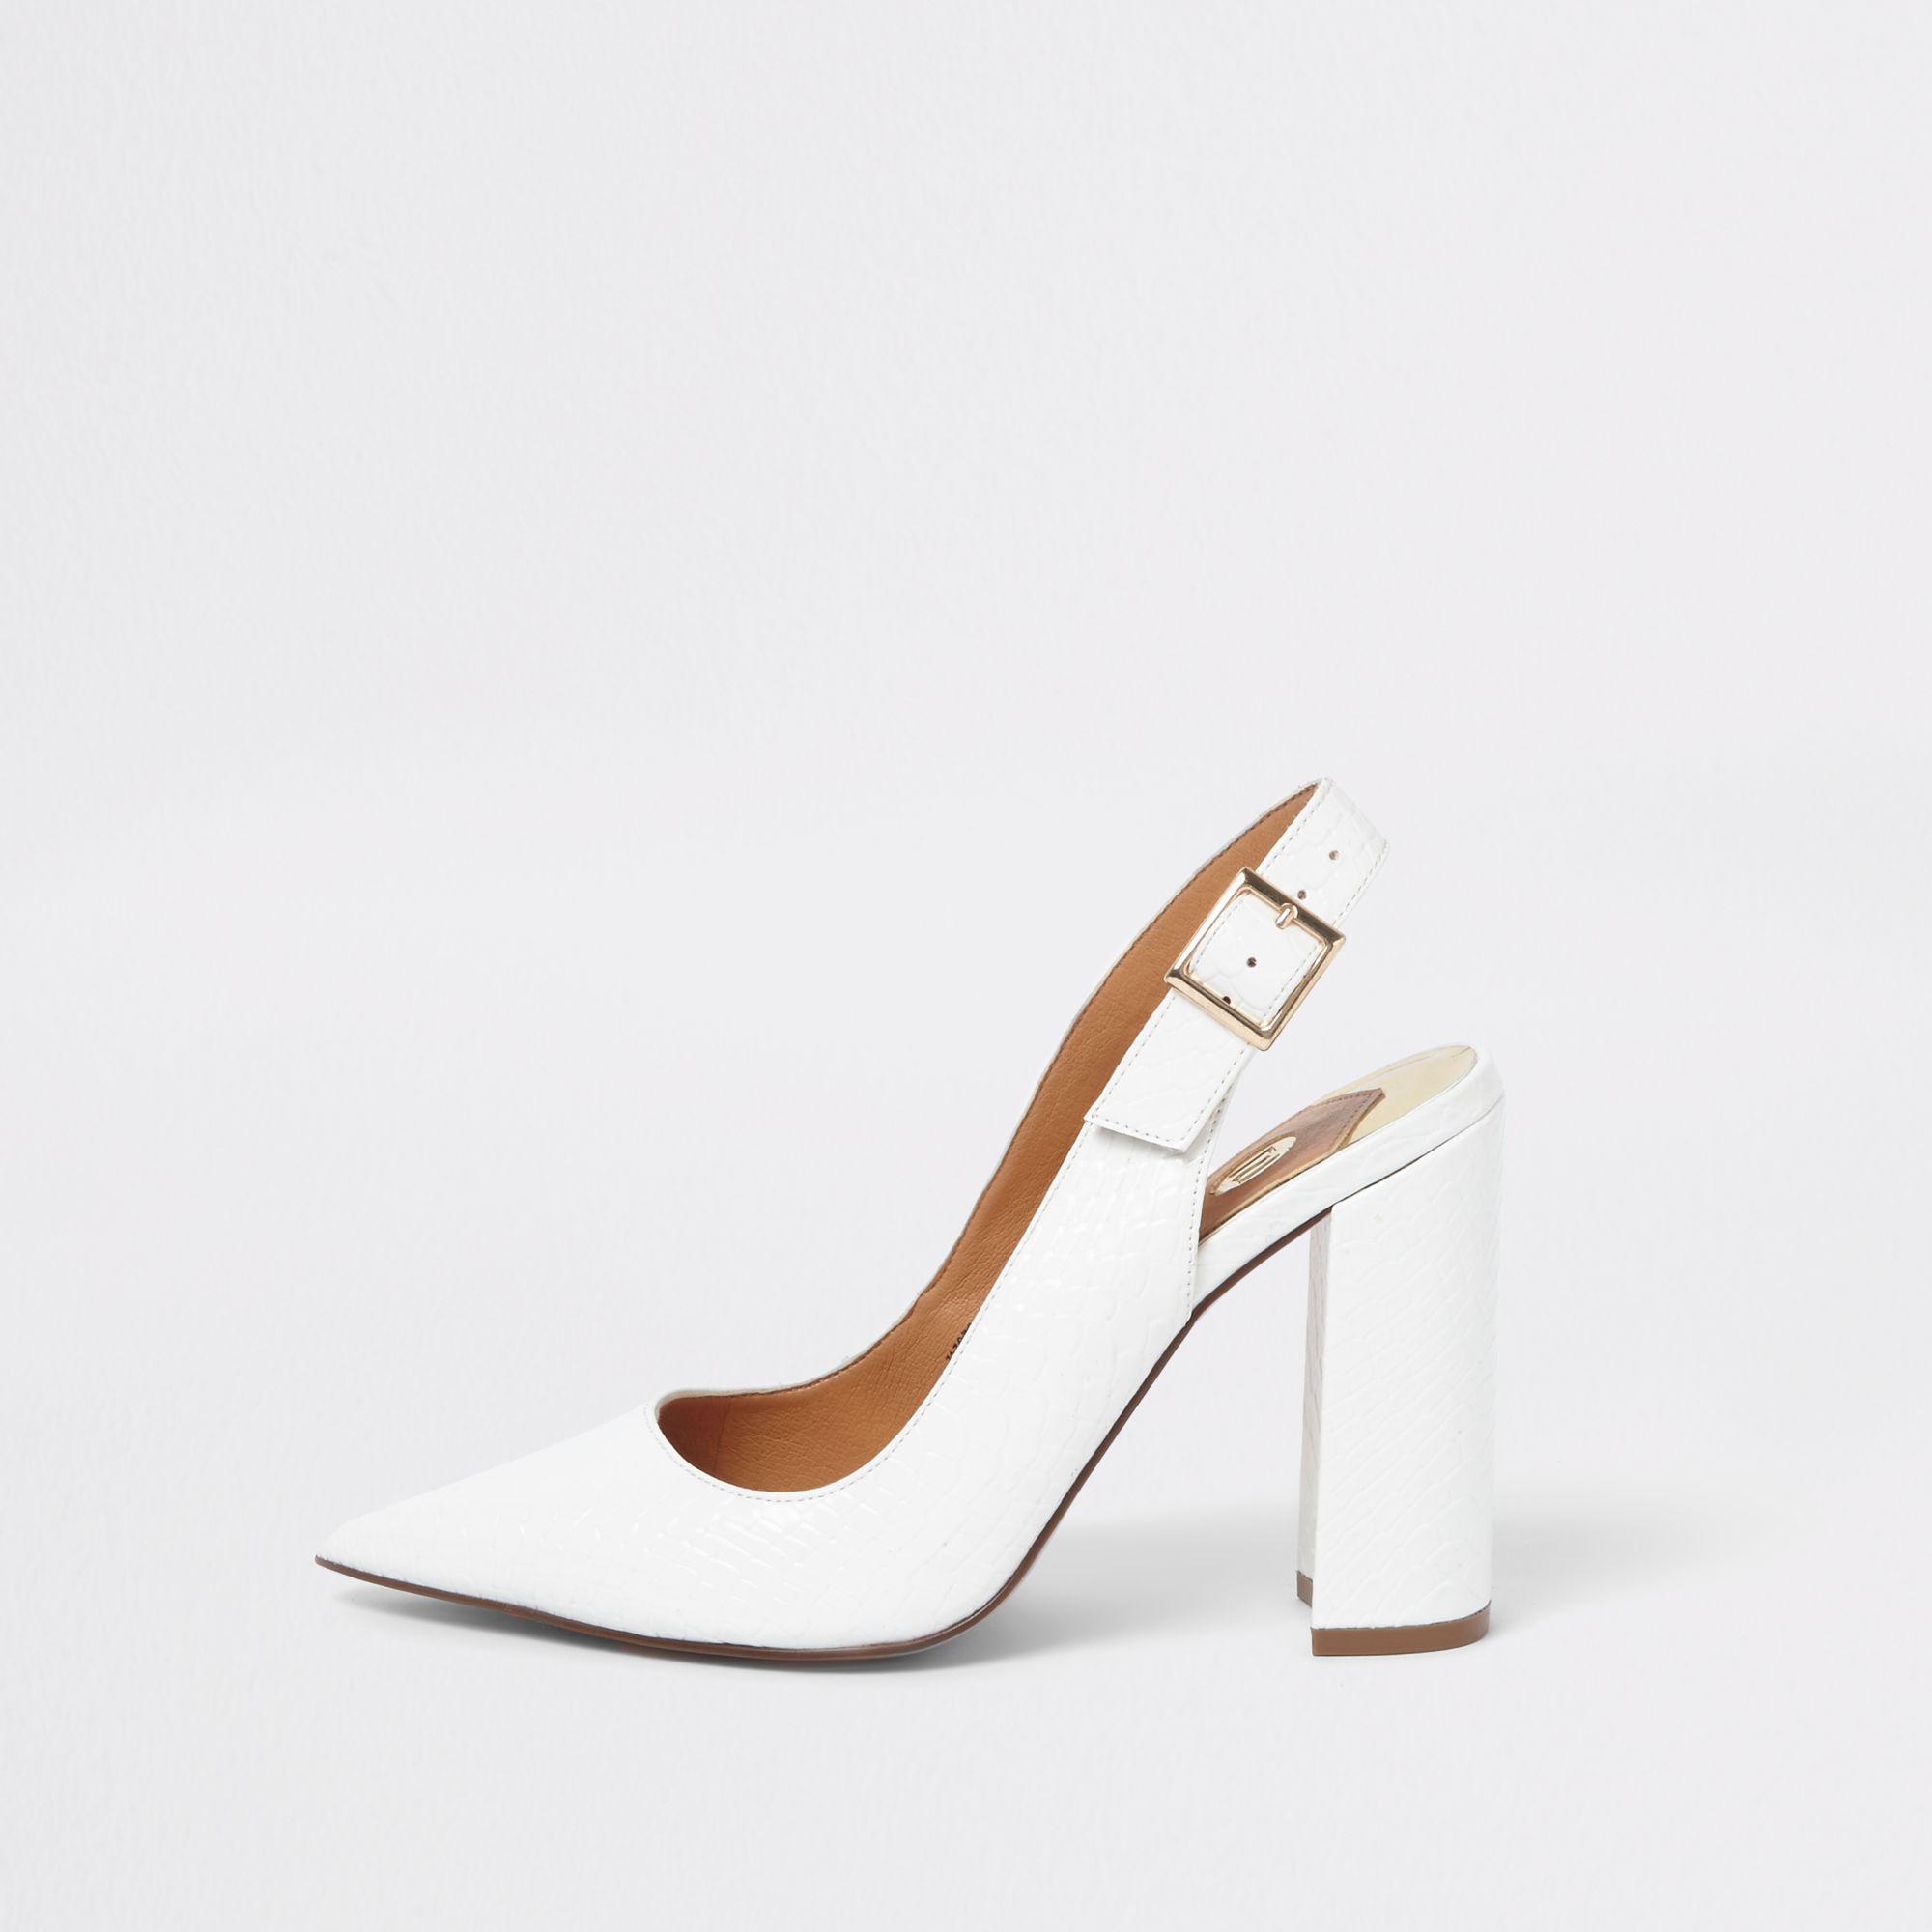 River Island Croc Block Heel Sling Back Court Shoes in White | Lyst UK